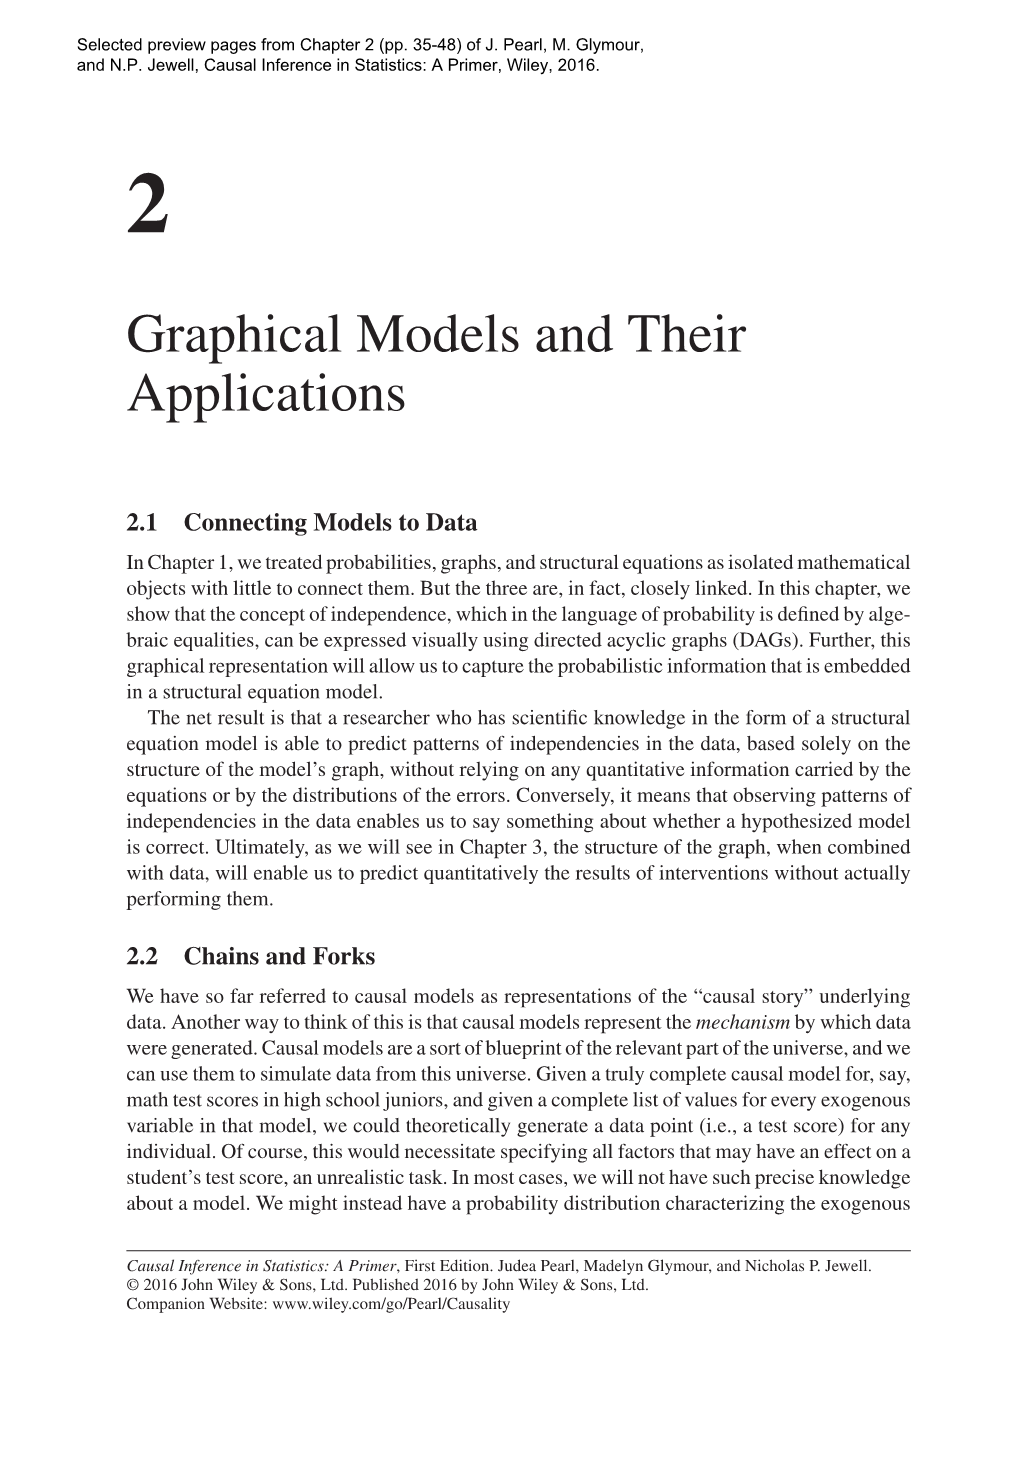 Graphical Models and Their Applications